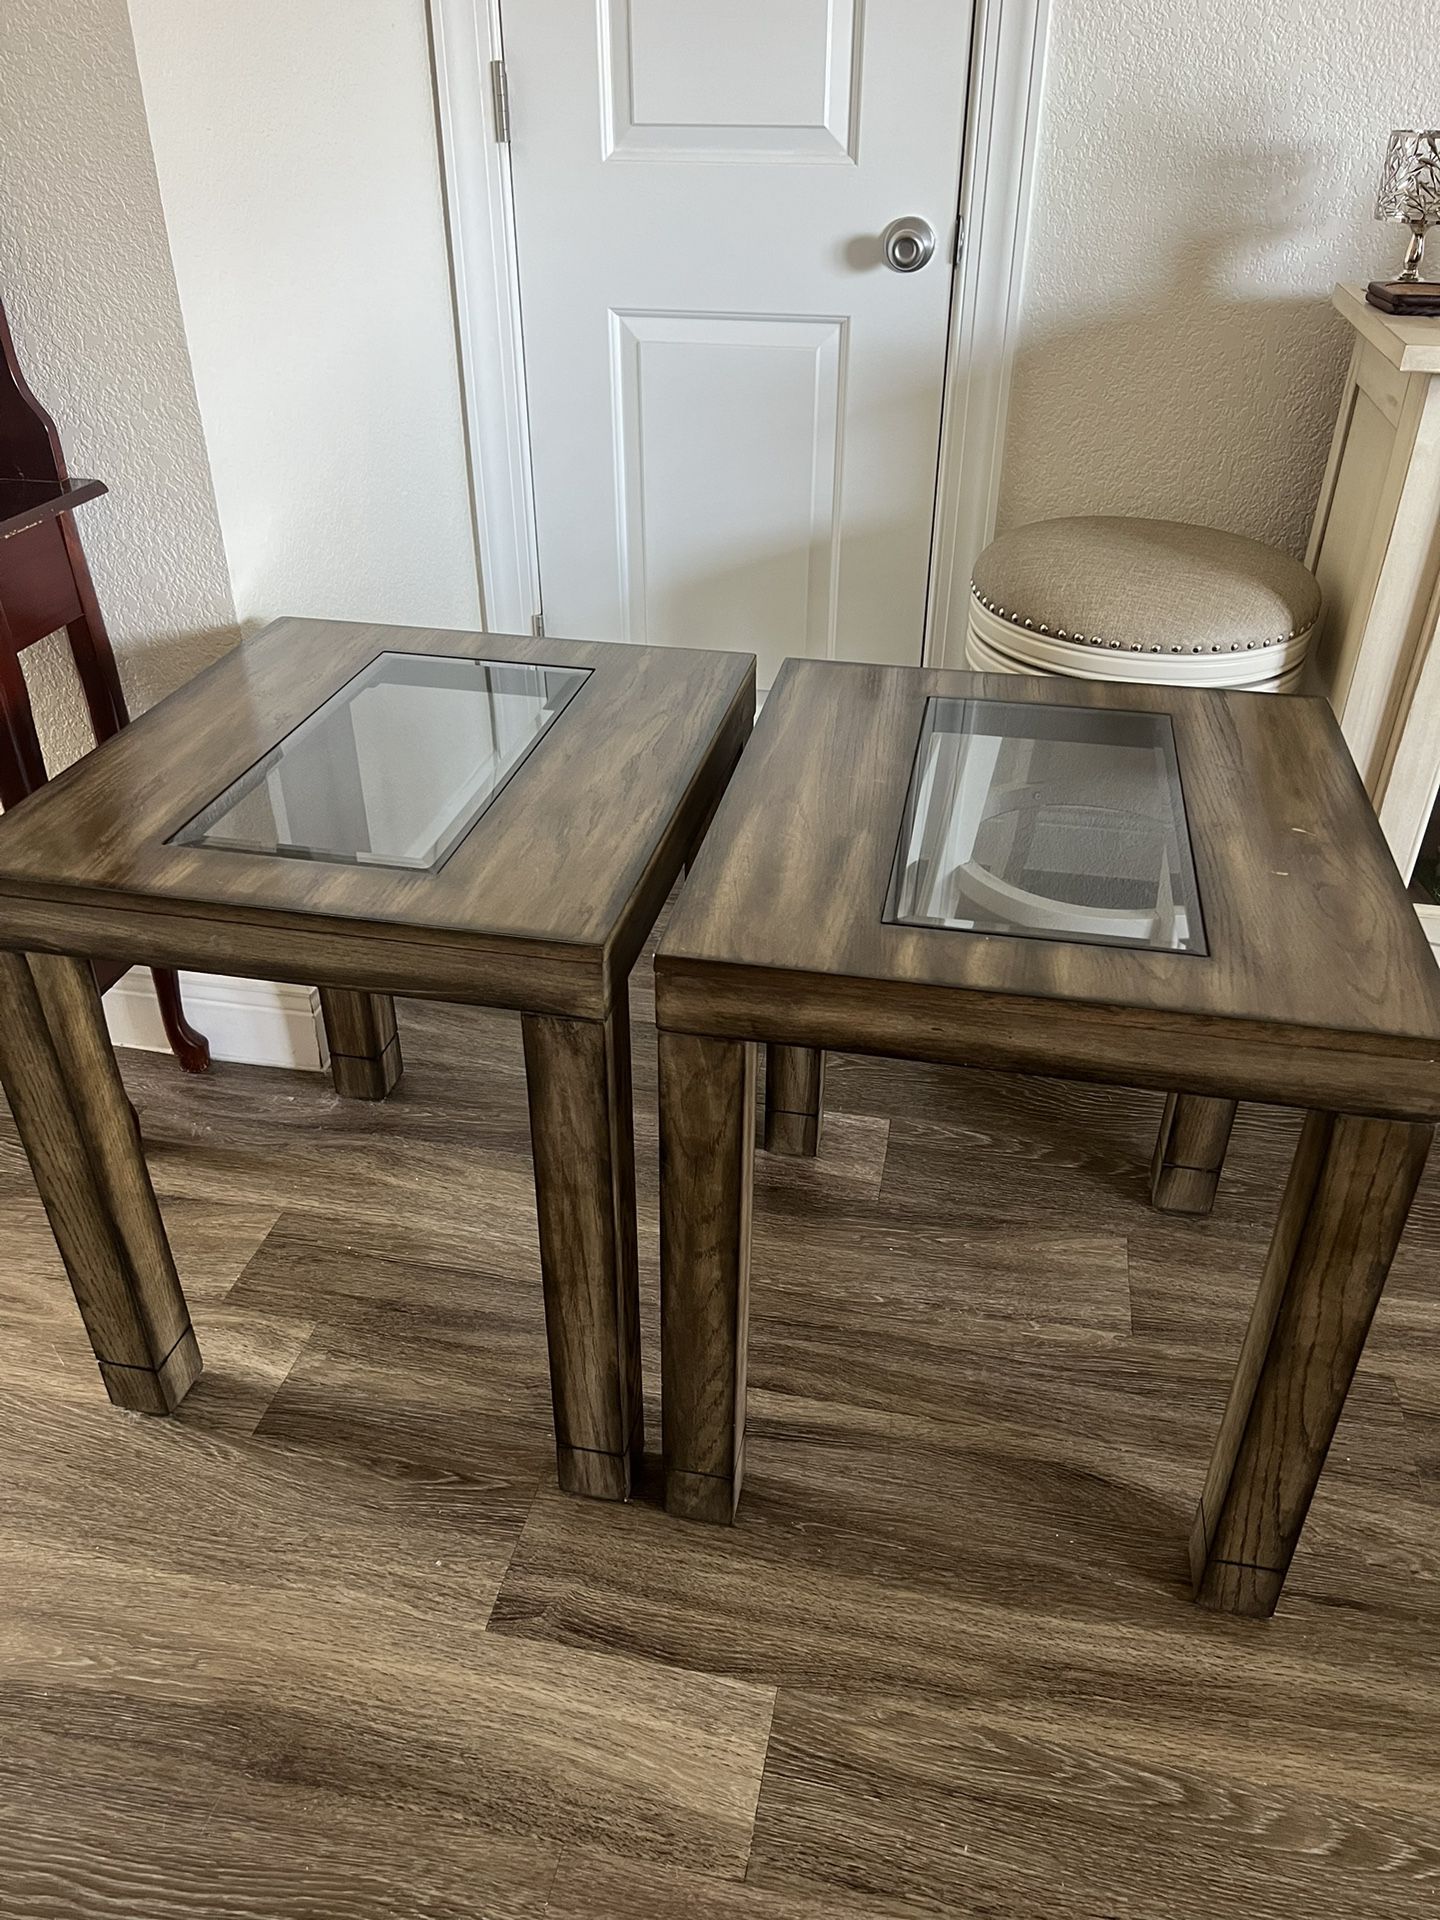 End Tables- $30 For BOTH! 